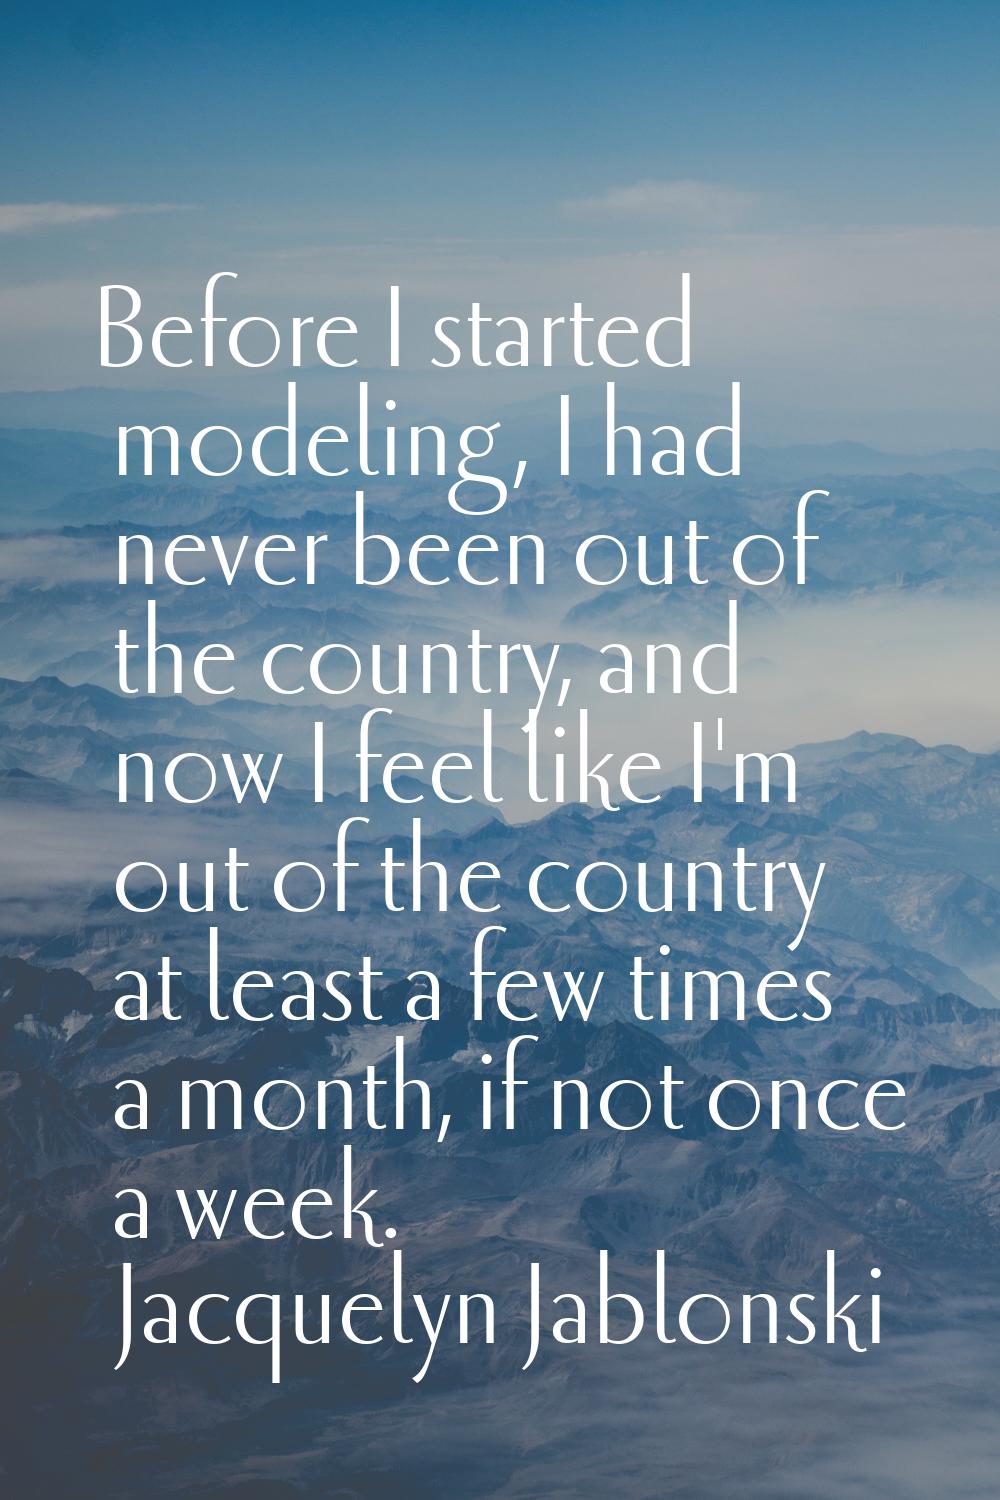 Before I started modeling, I had never been out of the country, and now I feel like I'm out of the 